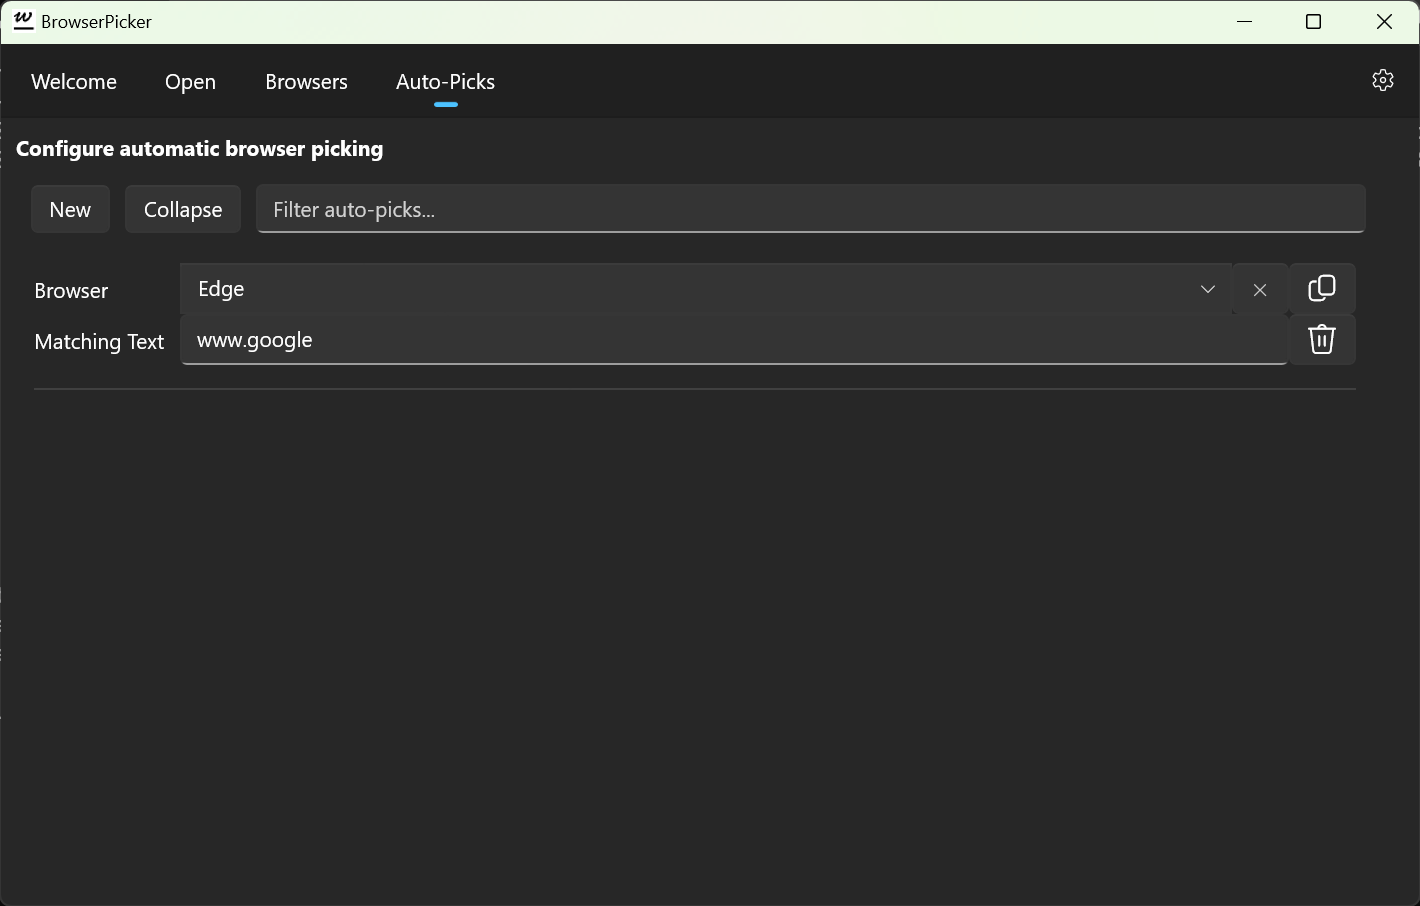 Auto-Picks page, where you can configure which browsers are automatically picked based on the URL (dark mode).